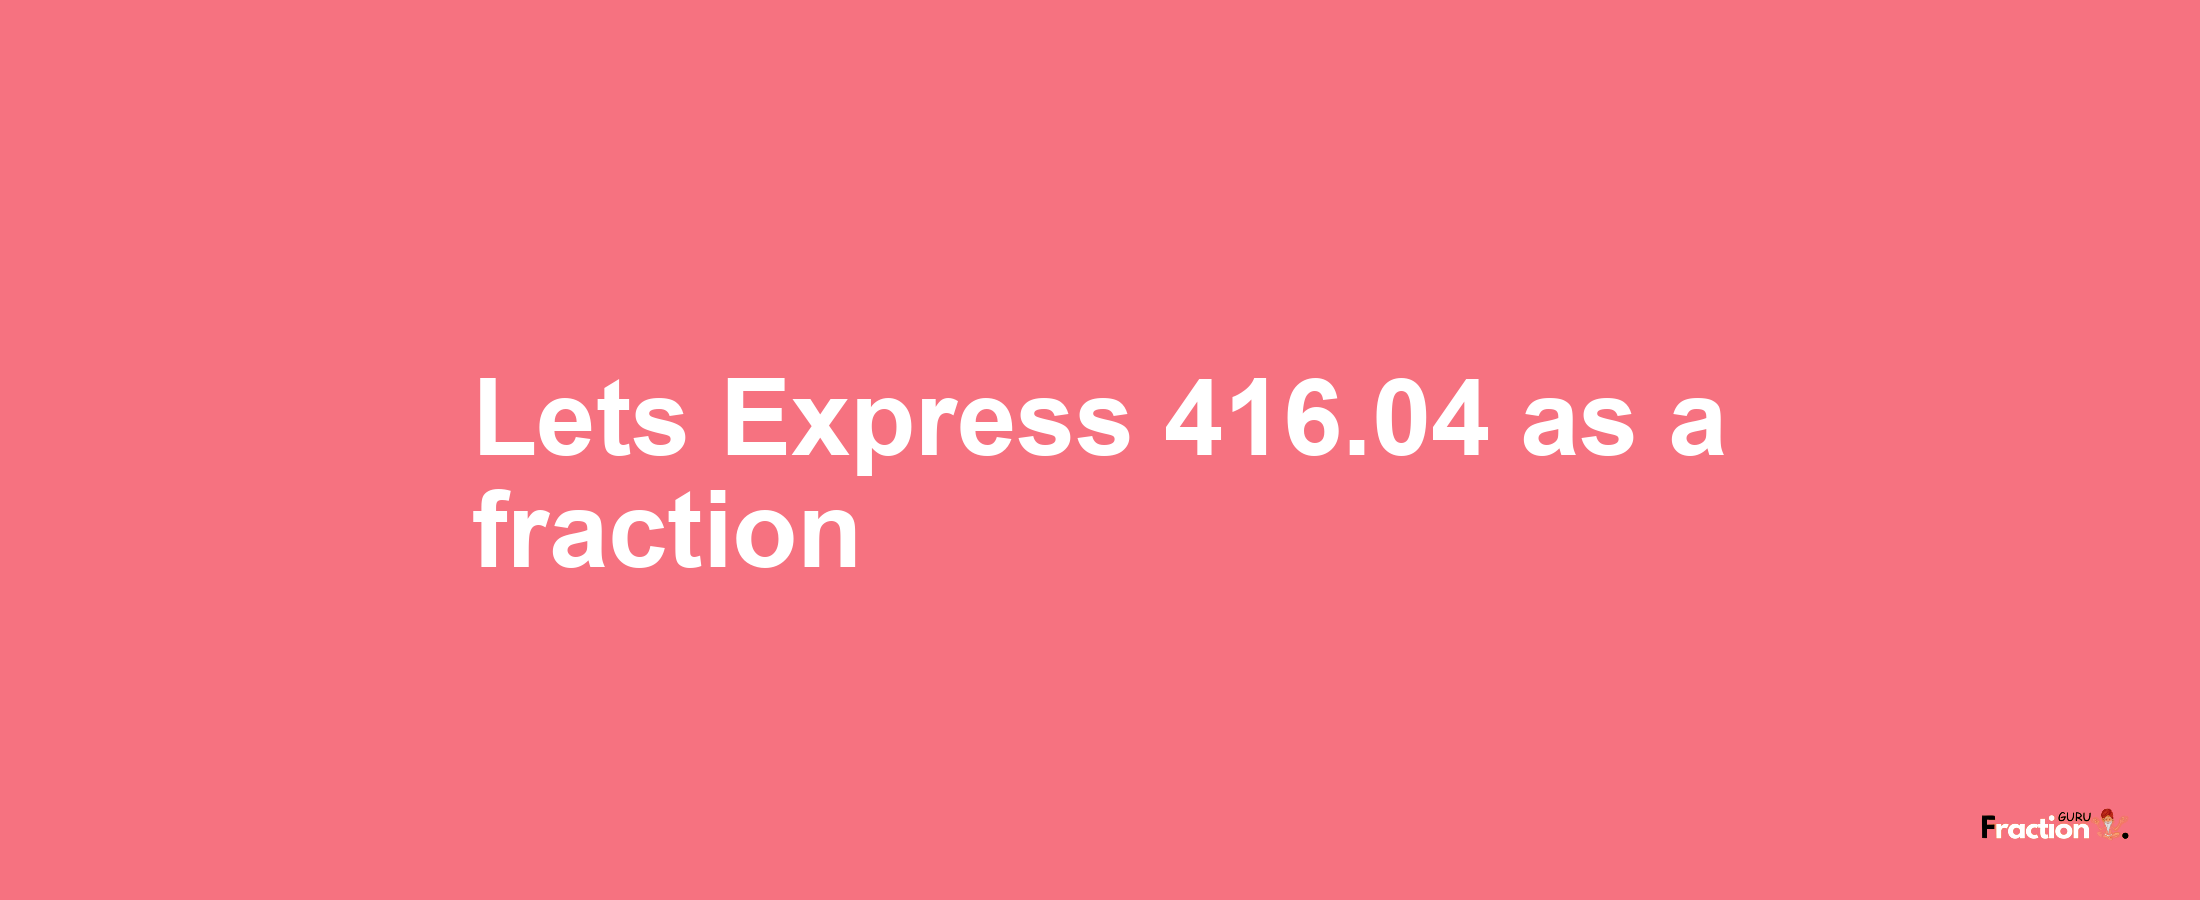 Lets Express 416.04 as afraction